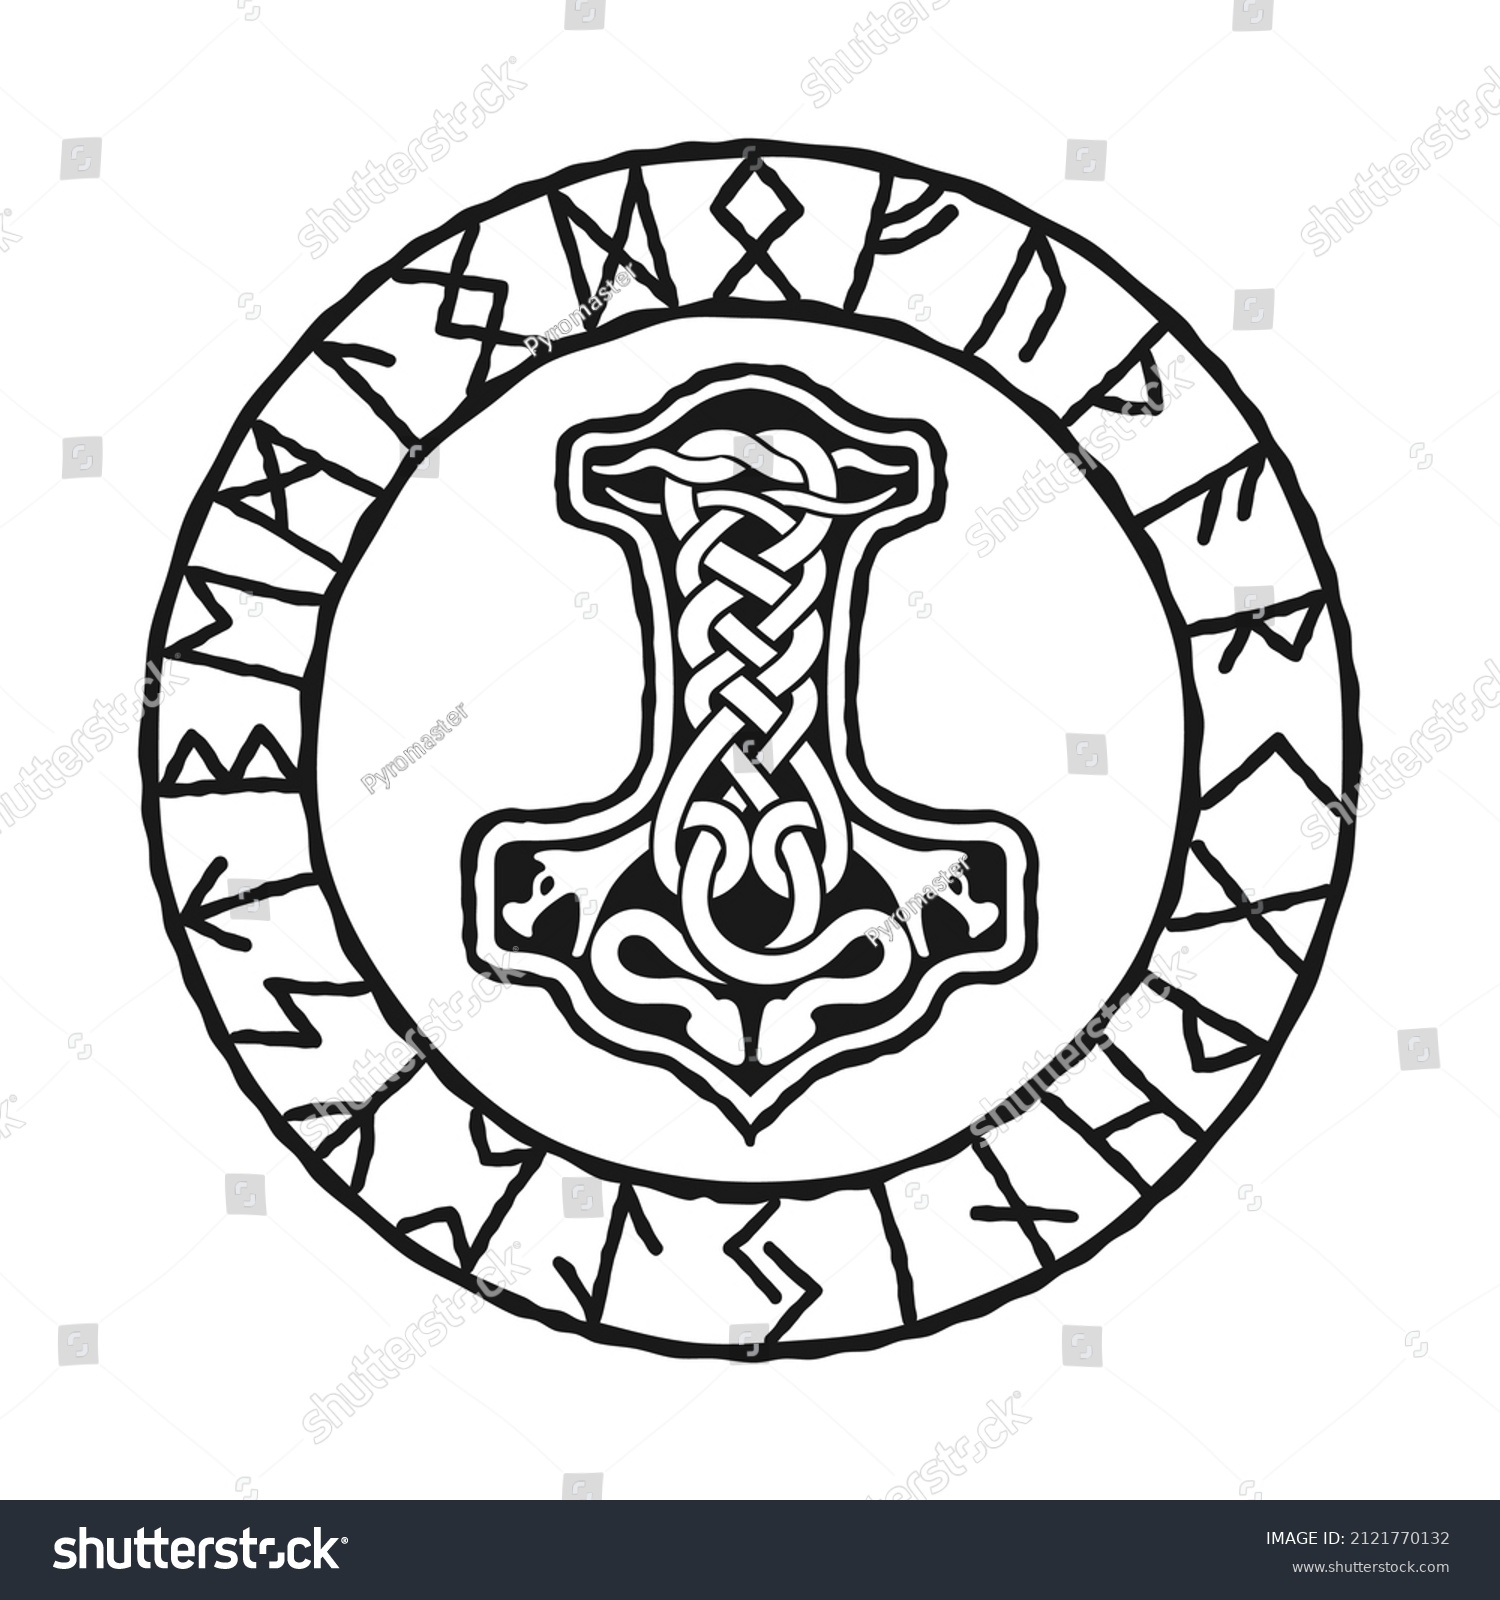 SVG of Mjolnir - Thors hammer, drawing in celtic knot design, and Norse runes circle, isolated on white, vector illustration. Viking style, design template svg